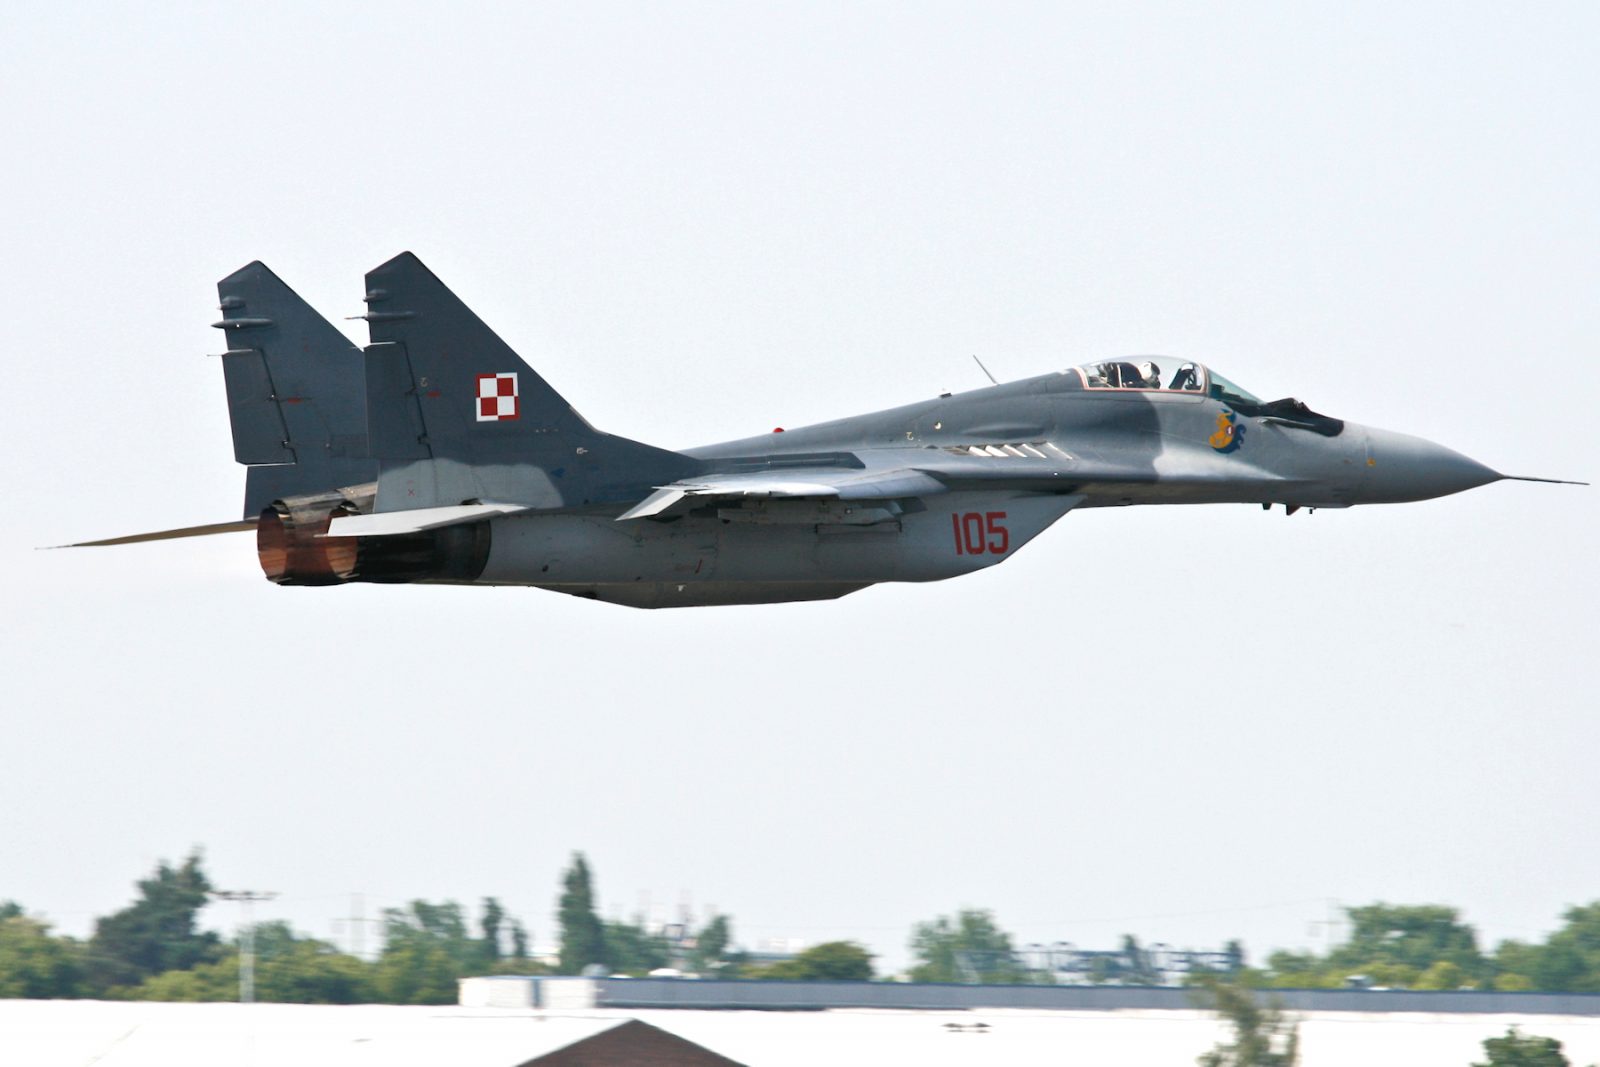 Polish Air Force Mikoyan-Gurevich MiG-29A Fulcrum at the 2008 ILA Airshow at Berlin-Schönefeld, Germany.